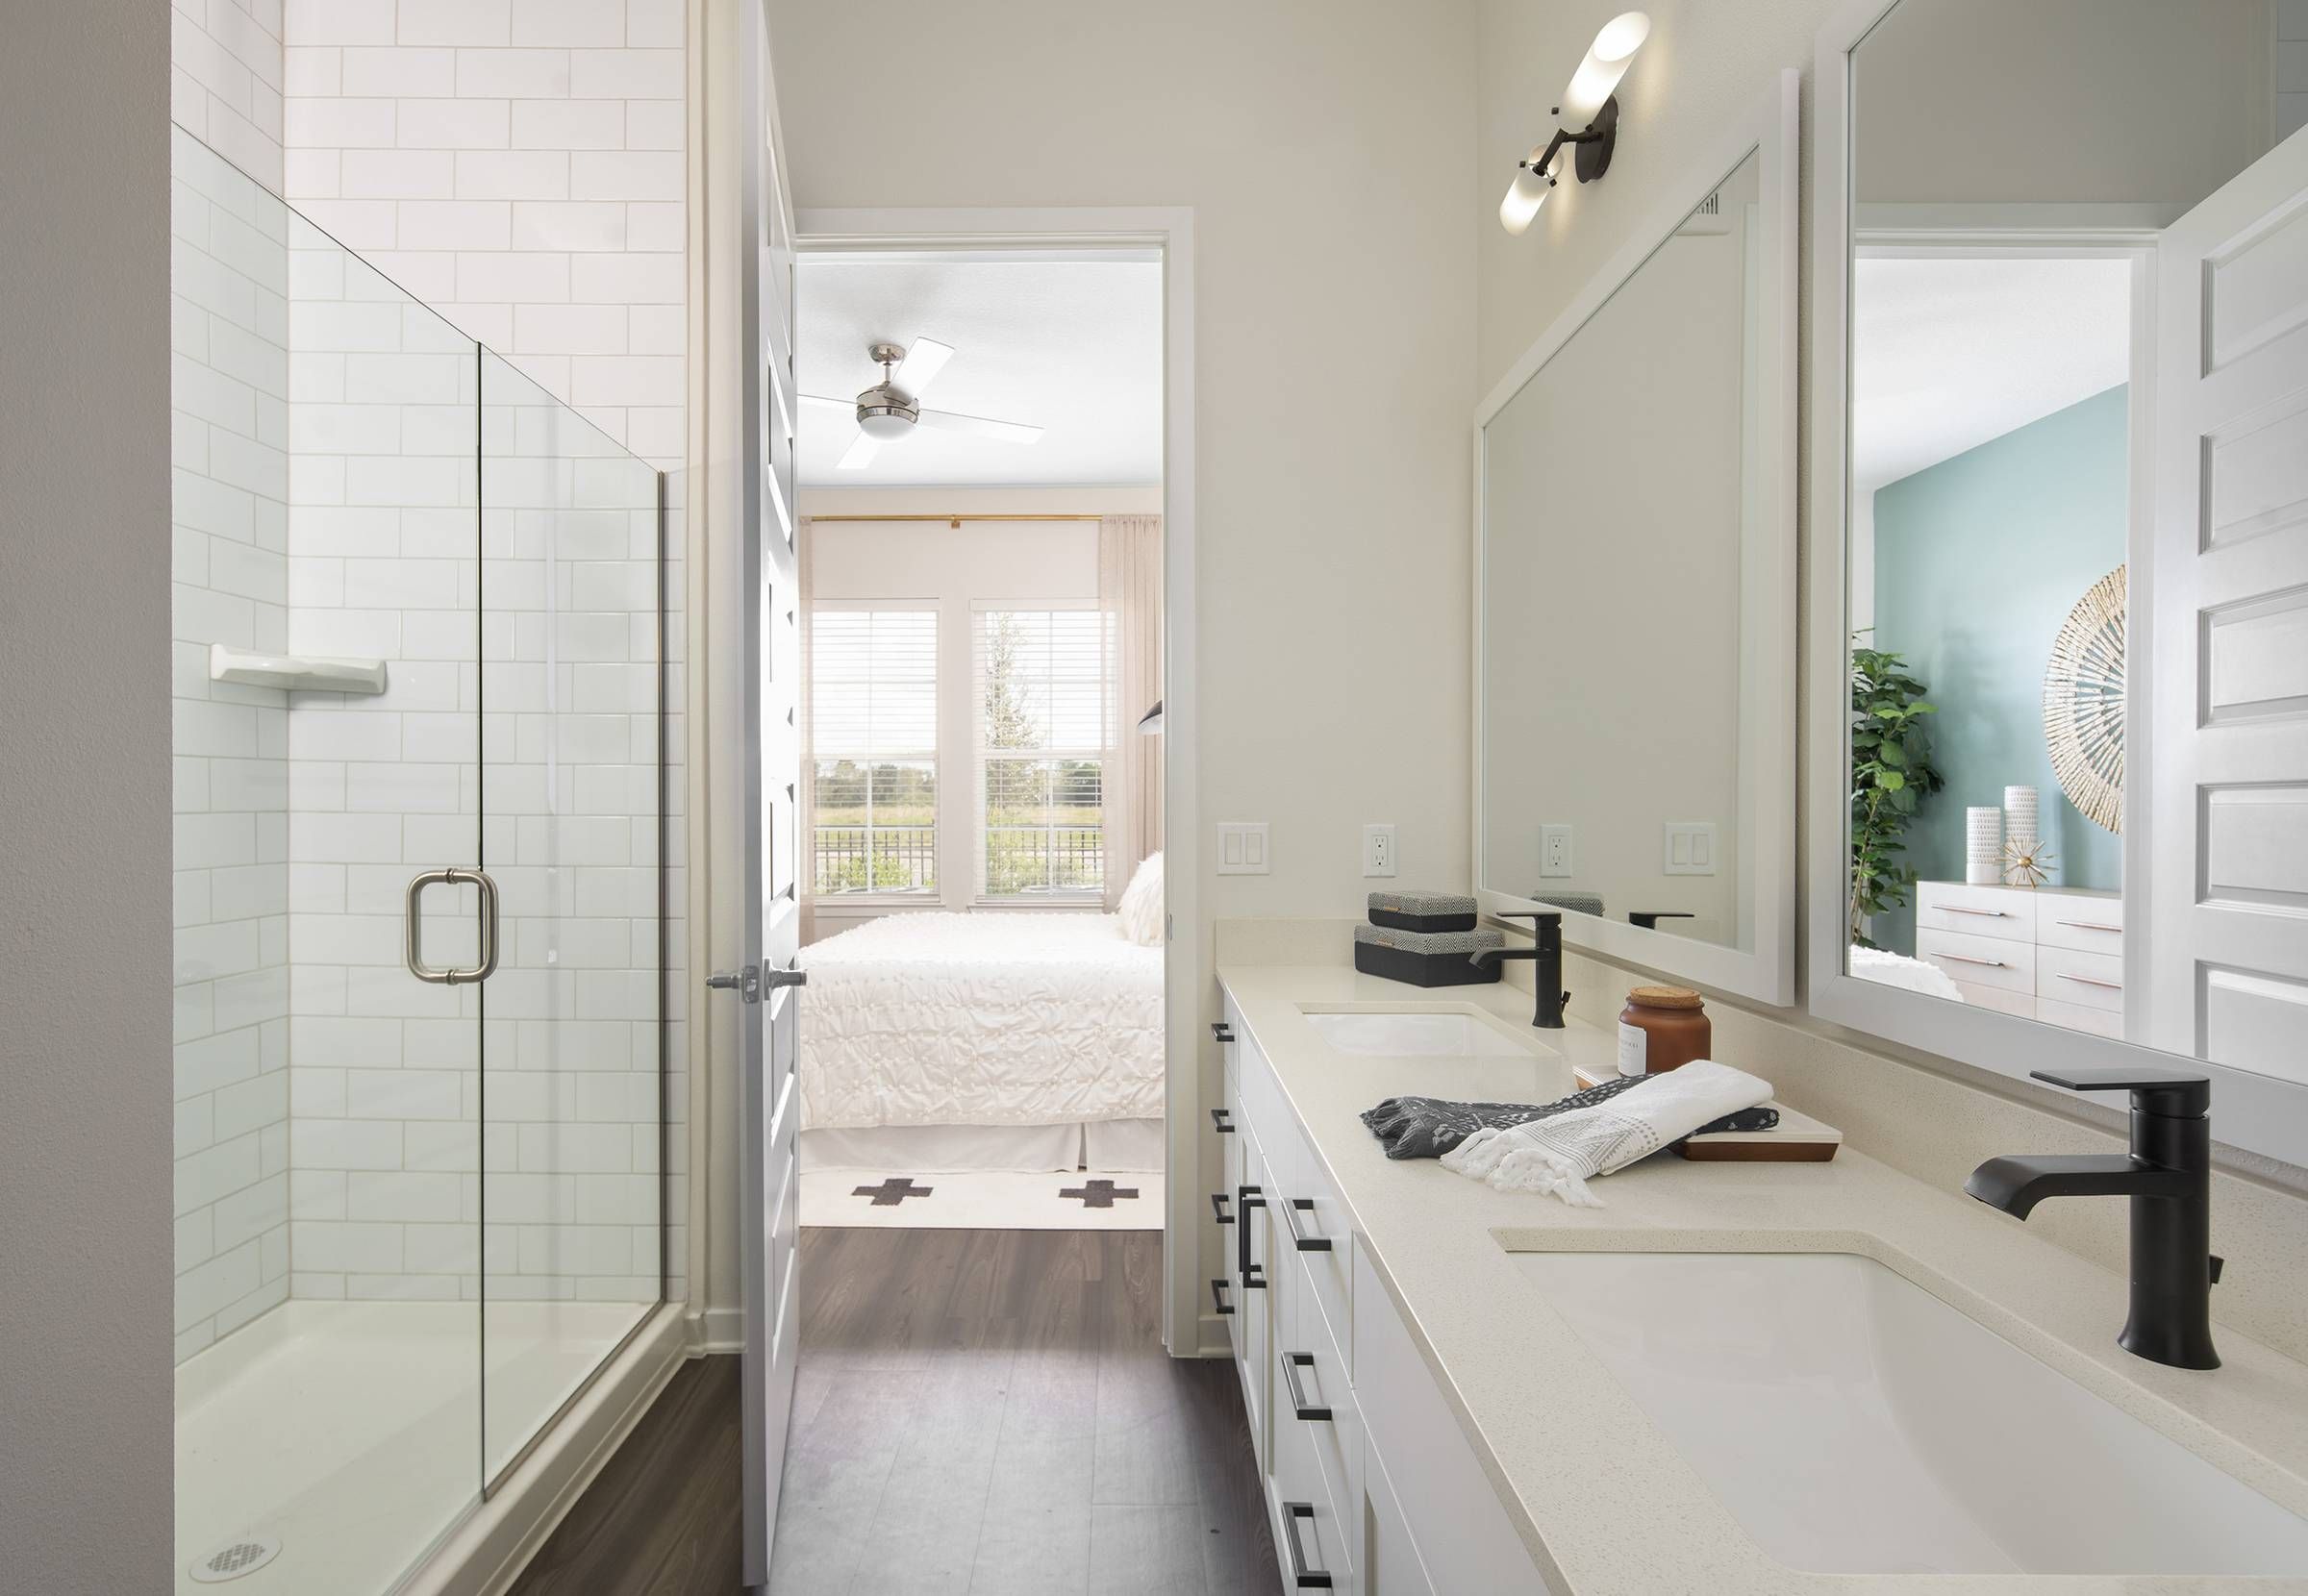 A modern and sleek bathroom in Alta Winter Garden with a glass-enclosed shower and a view into the adjoining bedroom.